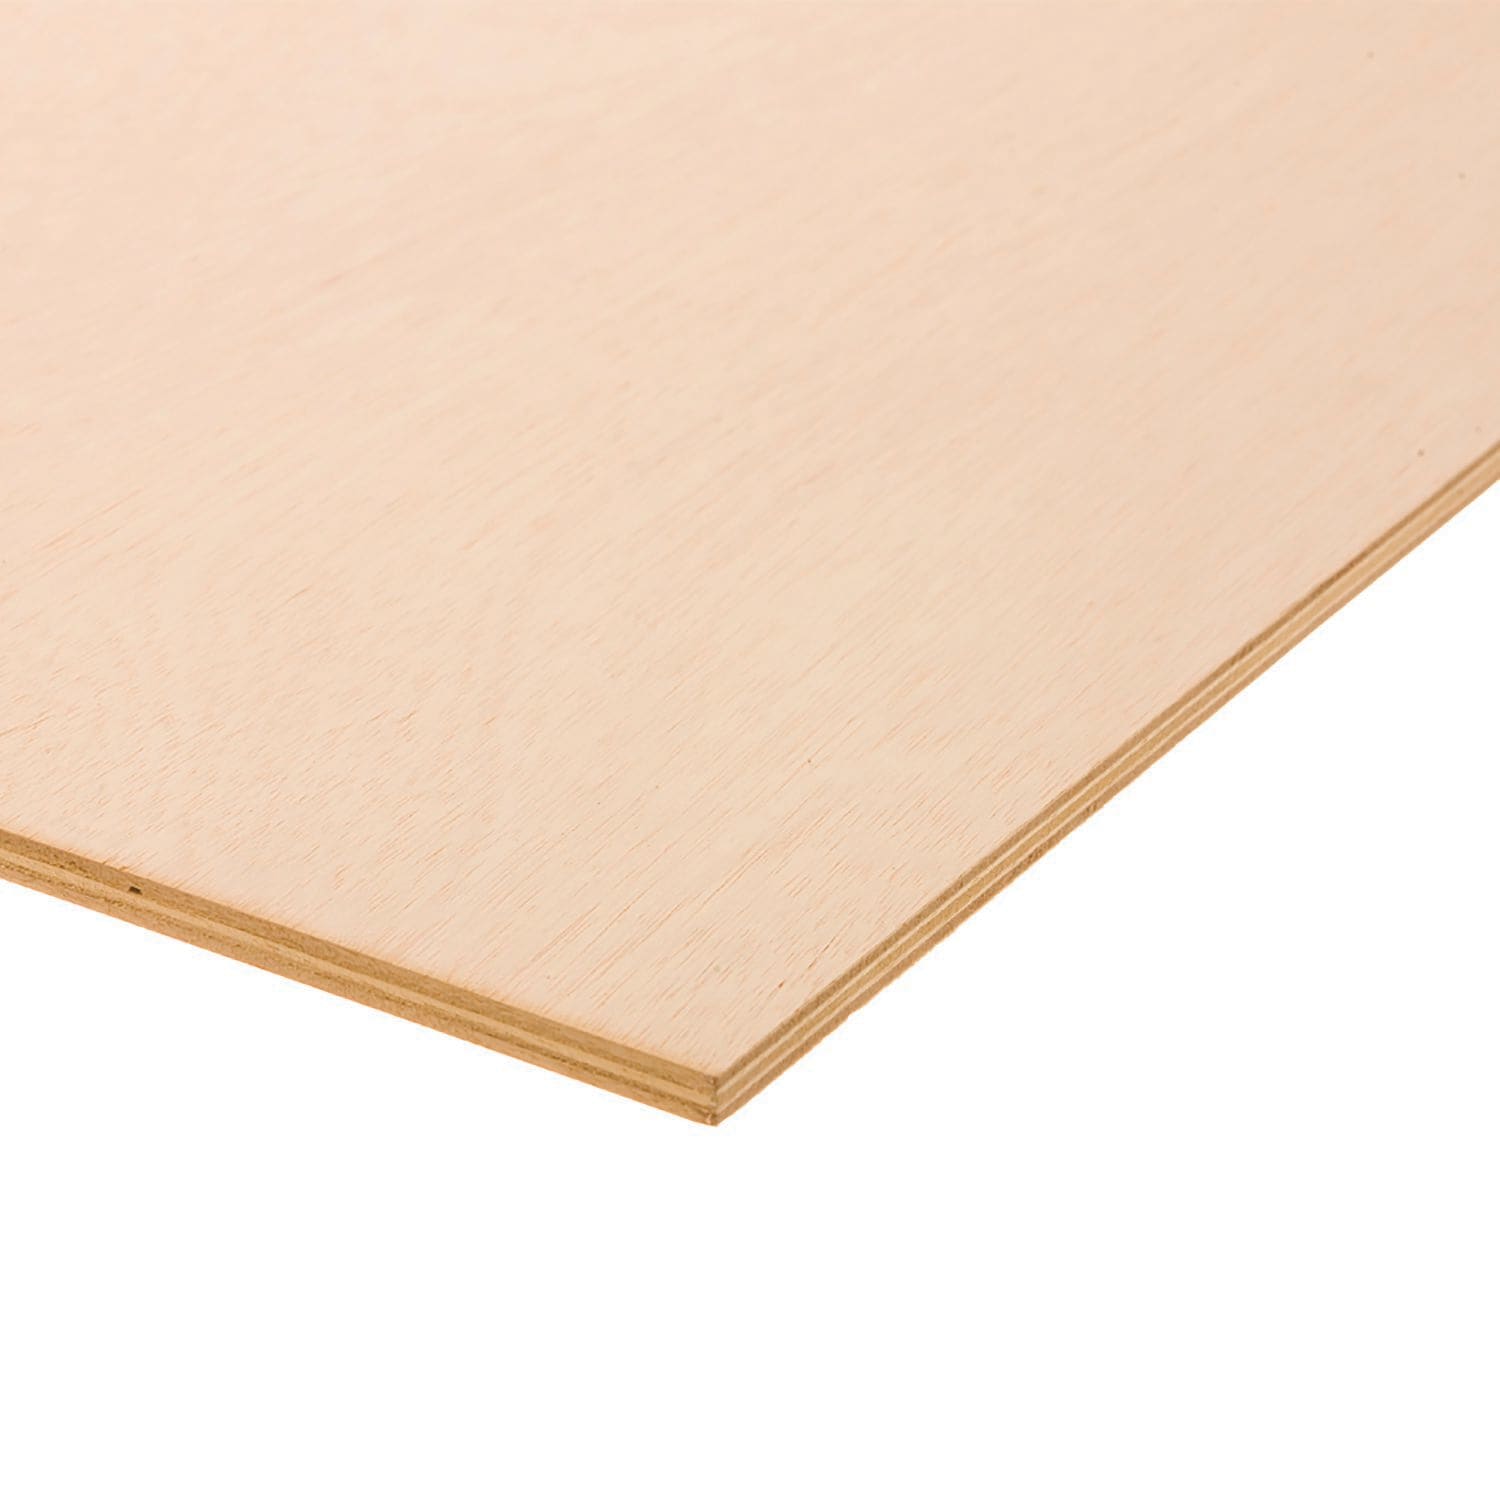 1/4 in. x 4 ft. x 8 ft. BC Sanded Pine Plywood 235552 - The Home Depot